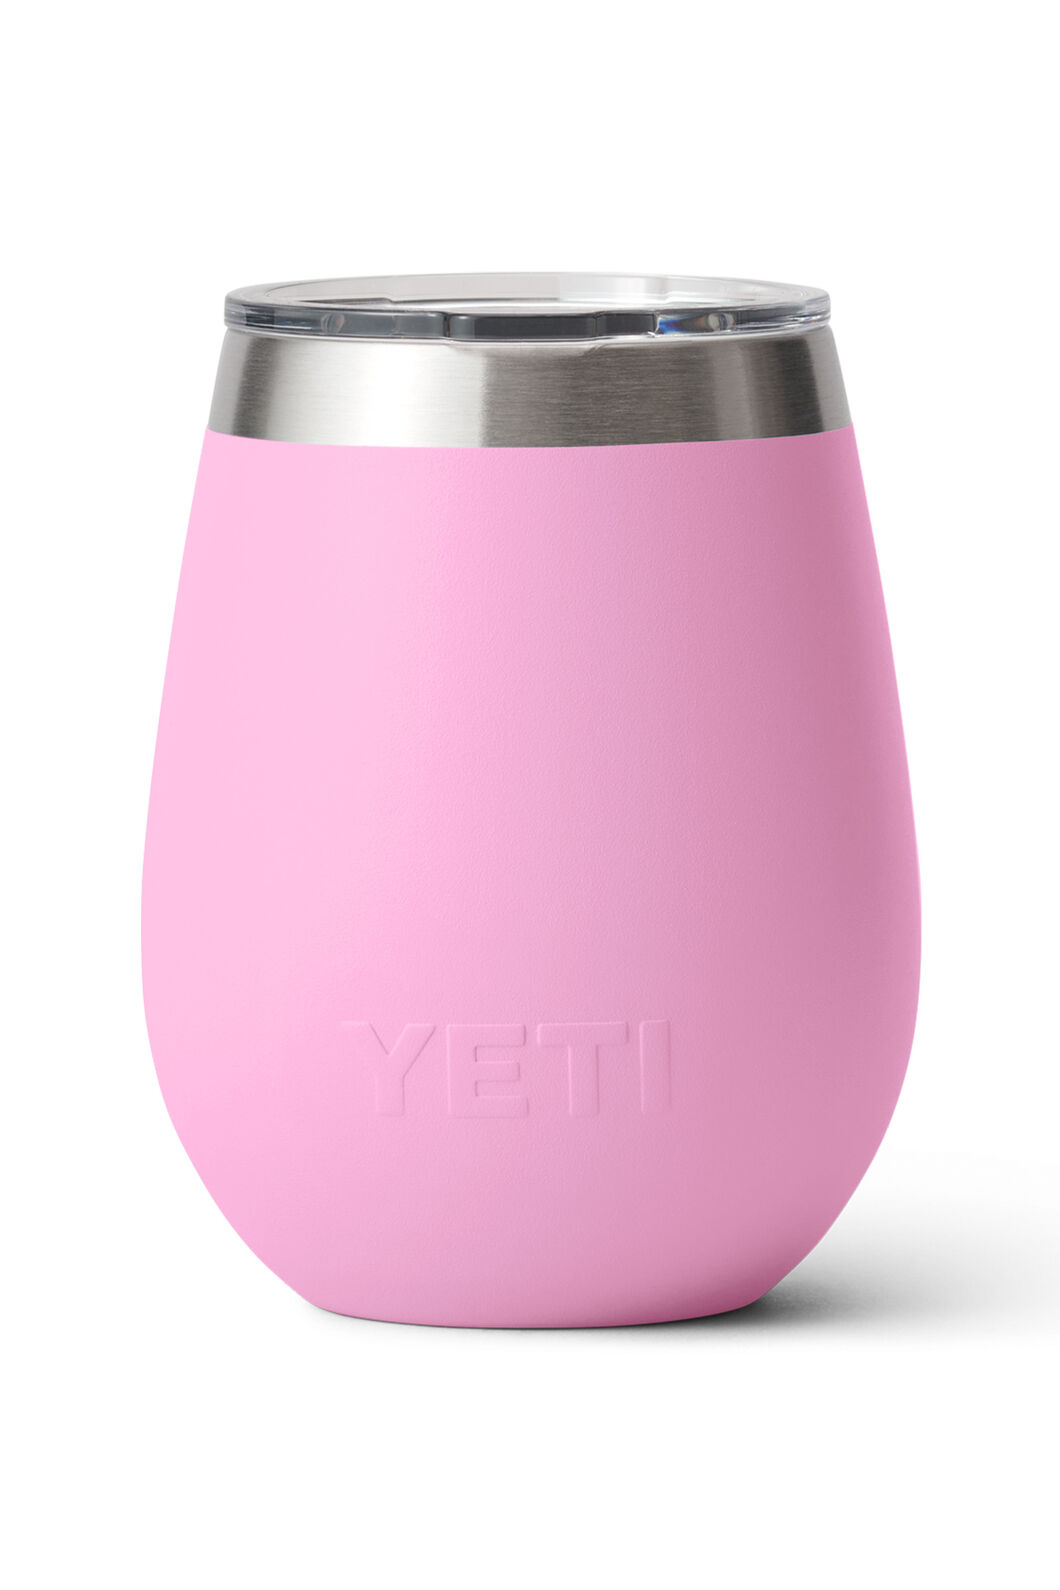 EVERY SHADE OF PINK YETI (AND PURPLE) 